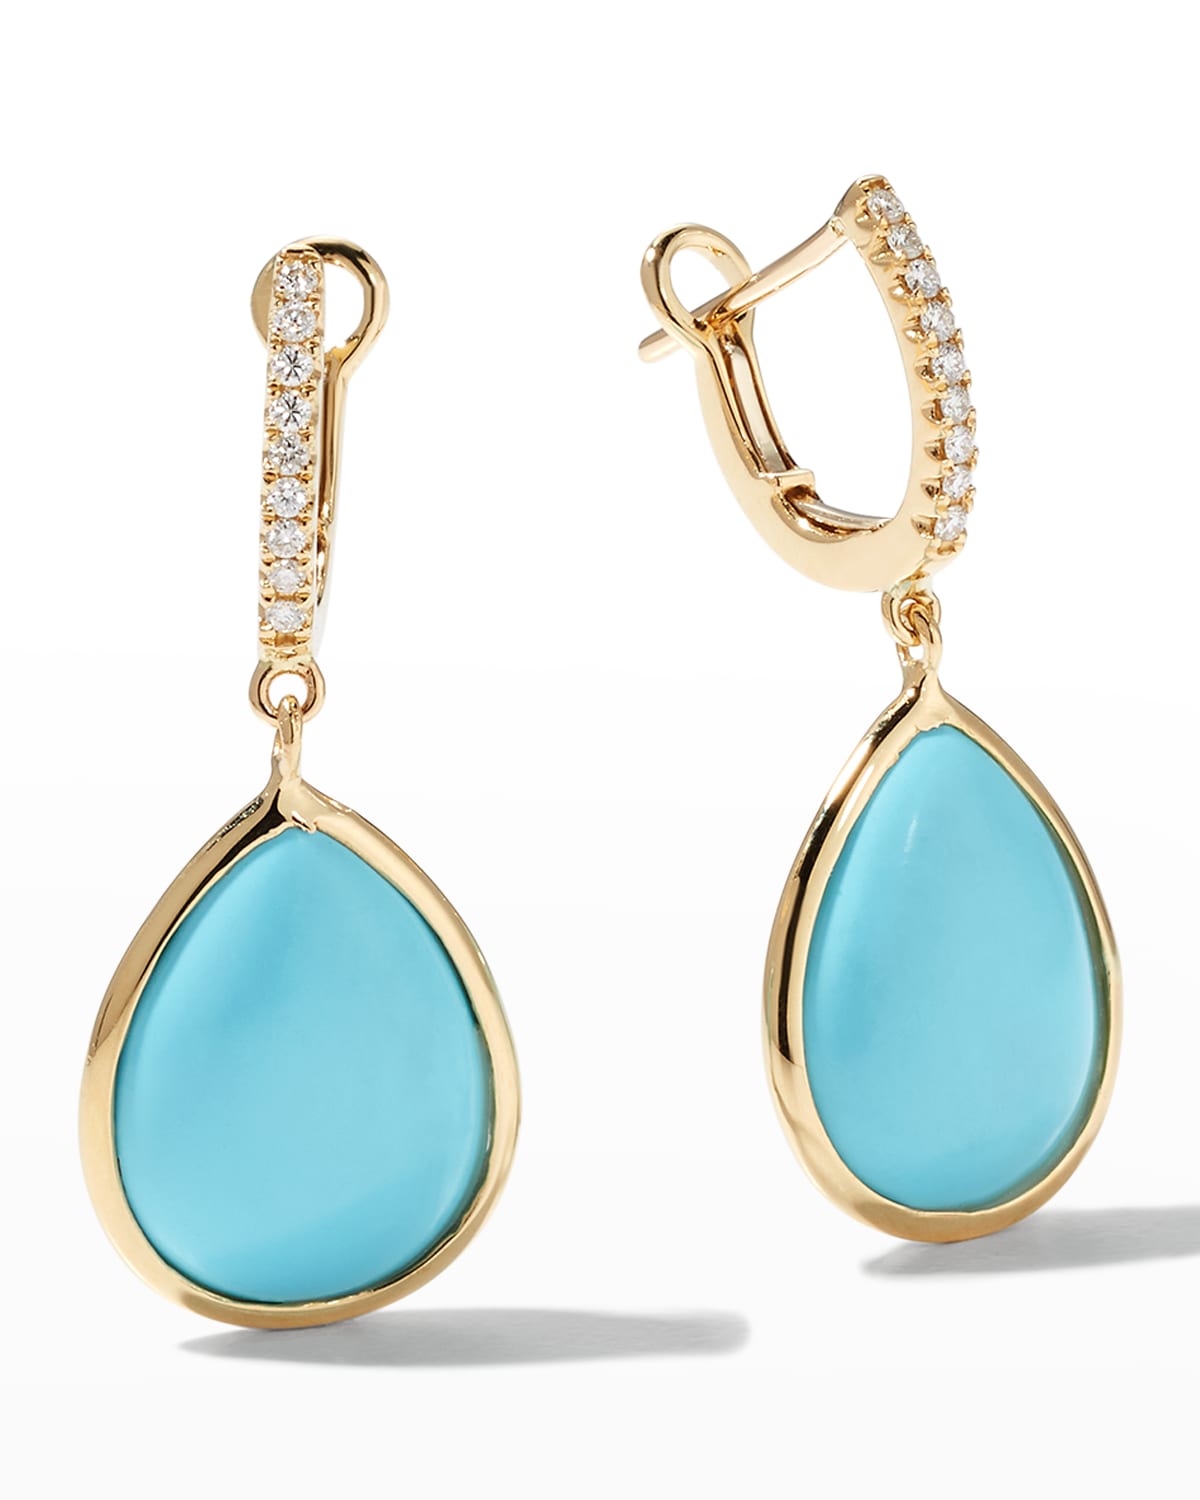 Frederic Sage Yellow Gold Small Pear-Shaped Luna Turquoise Earrings with Diamonds